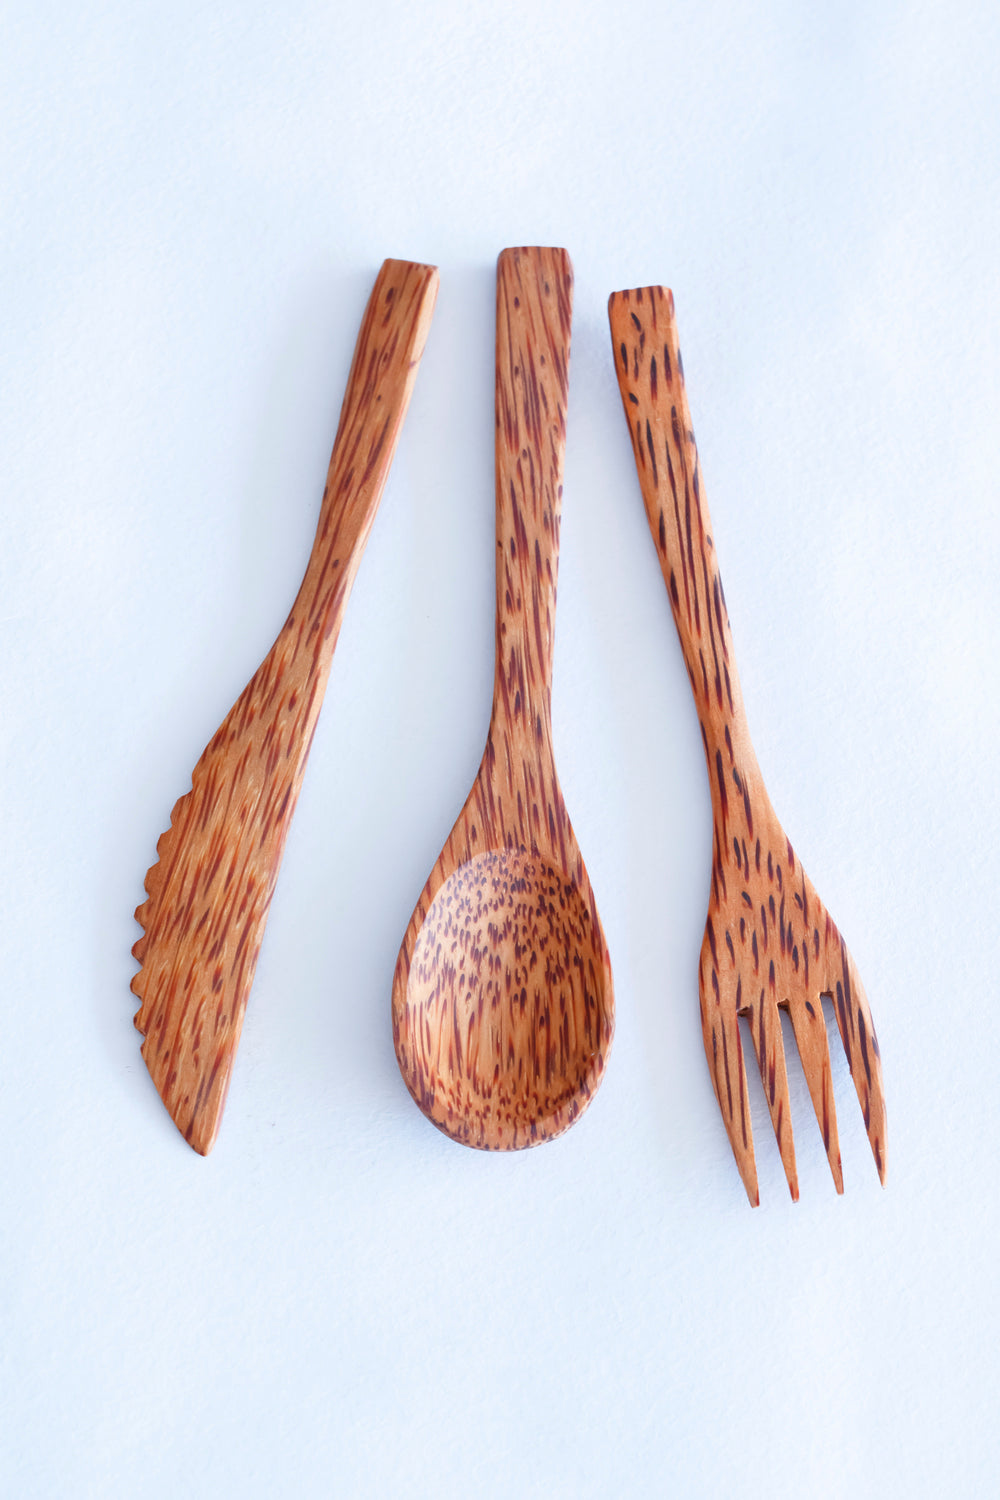 Thenga coconut wood cutlery - Set of spoon, fork and knife